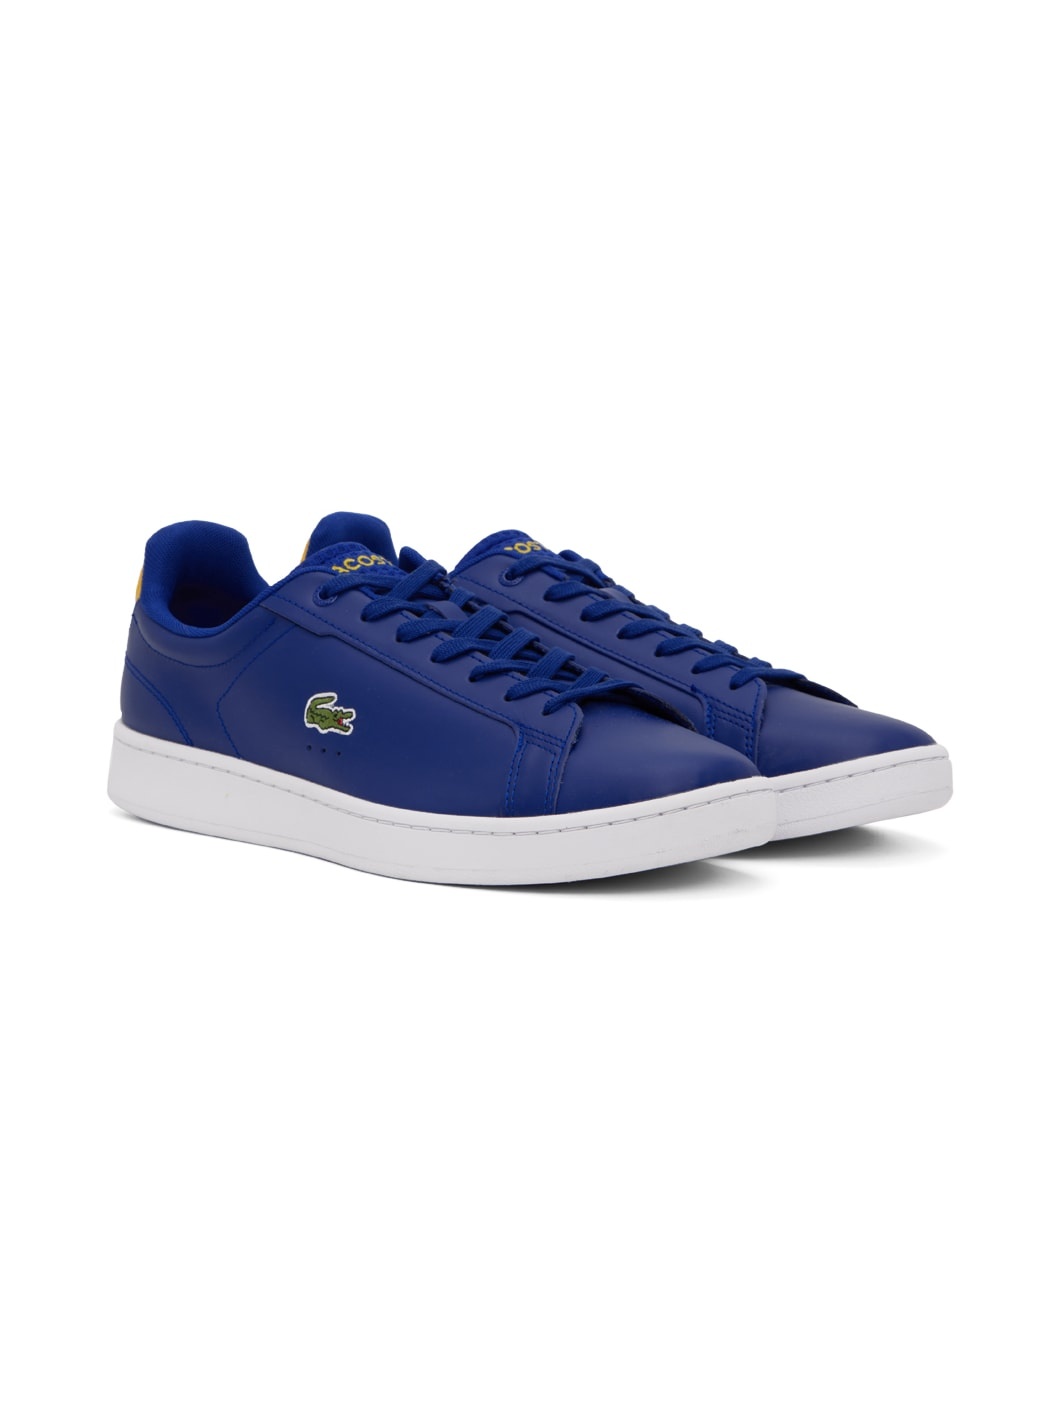 Blue Carnaby Pro Sneakers - 4